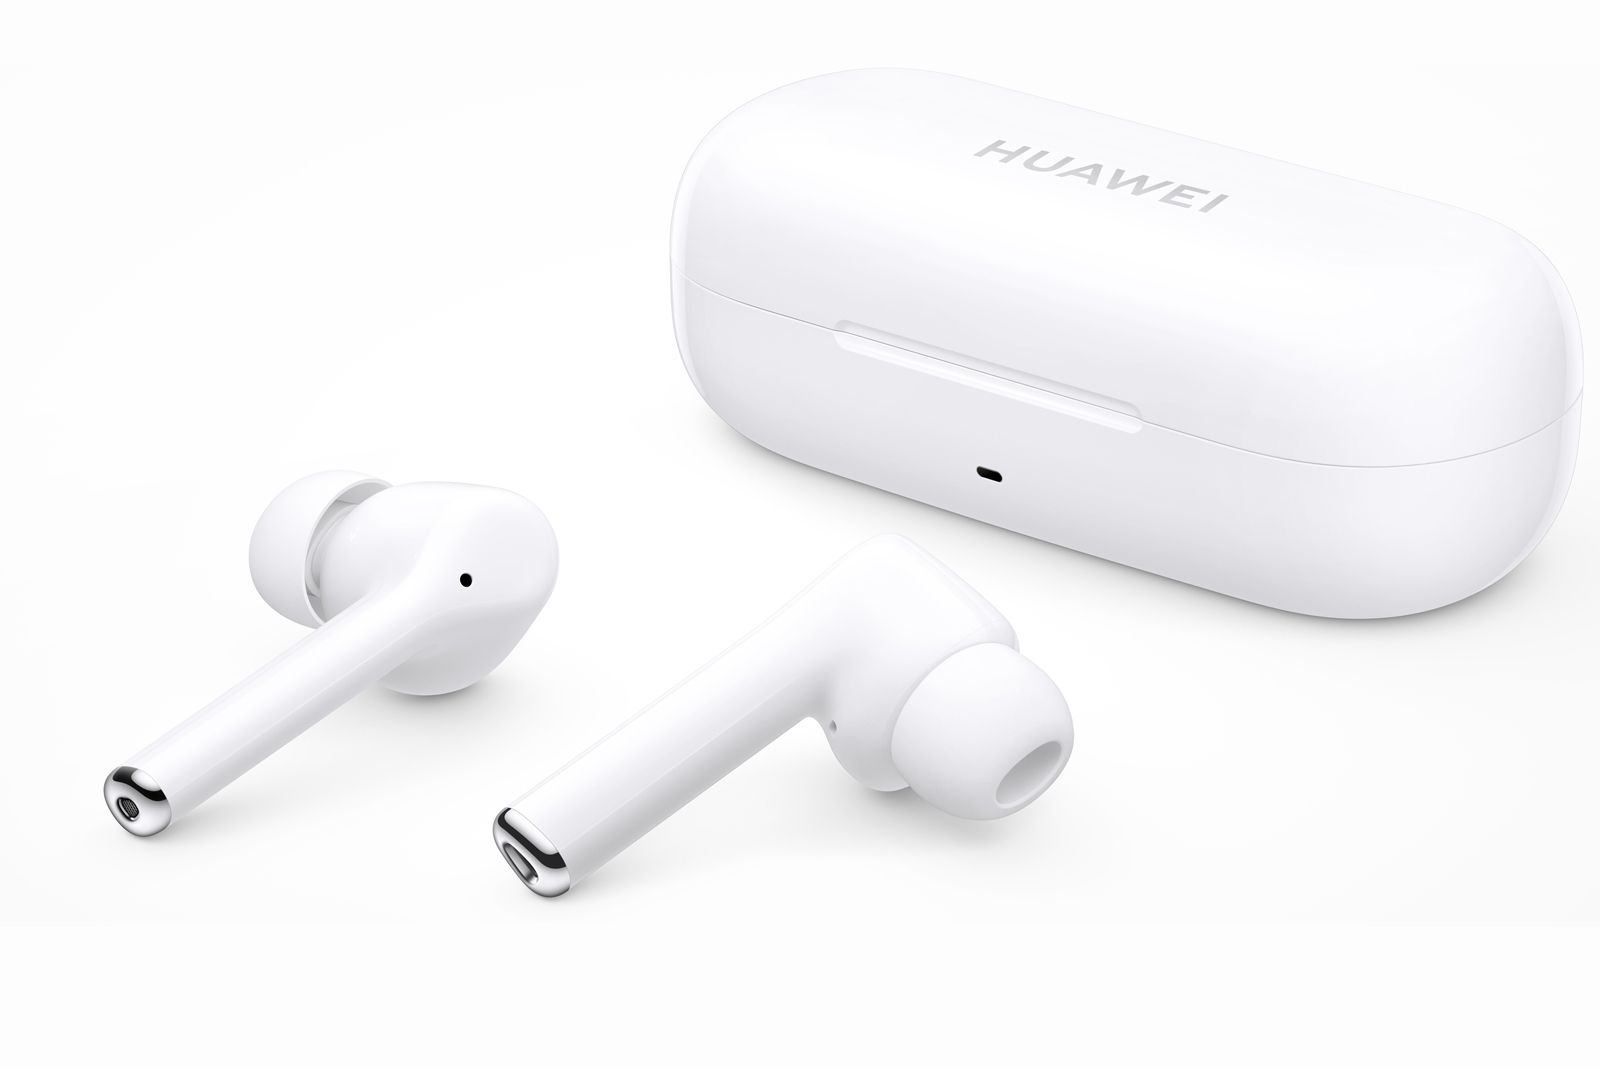 Huaweis latest FreeBuds 3i true wireless earbuds have a new design noise-cancellation and water resistance image 1